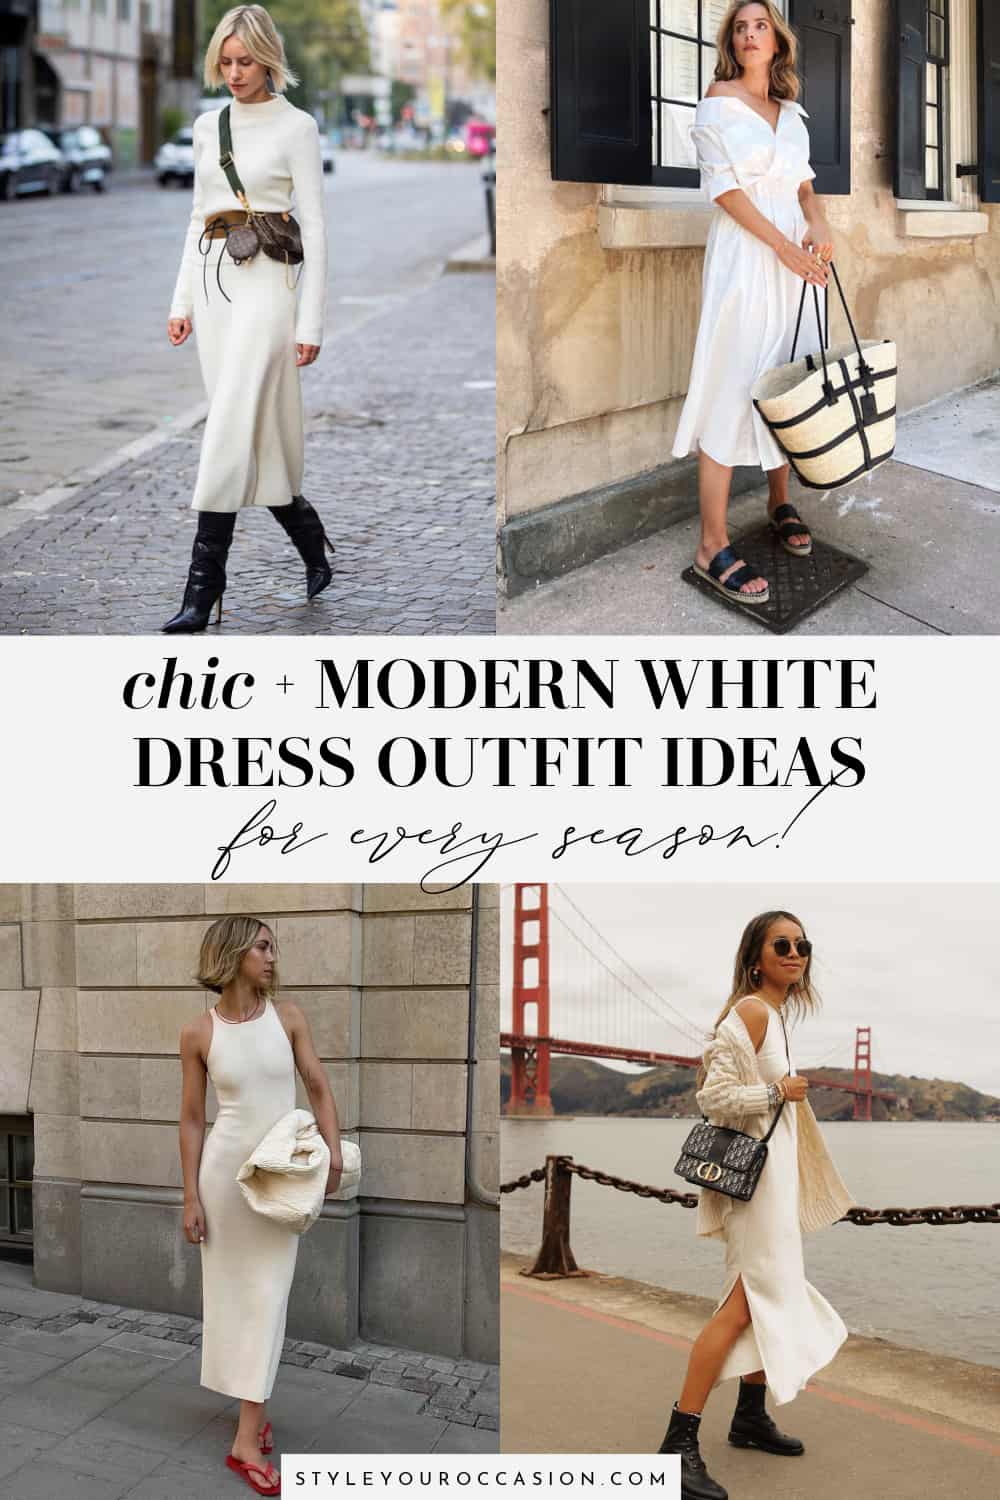 The Best Shoes To Wear With A White Dress + Chic Looks To Steal